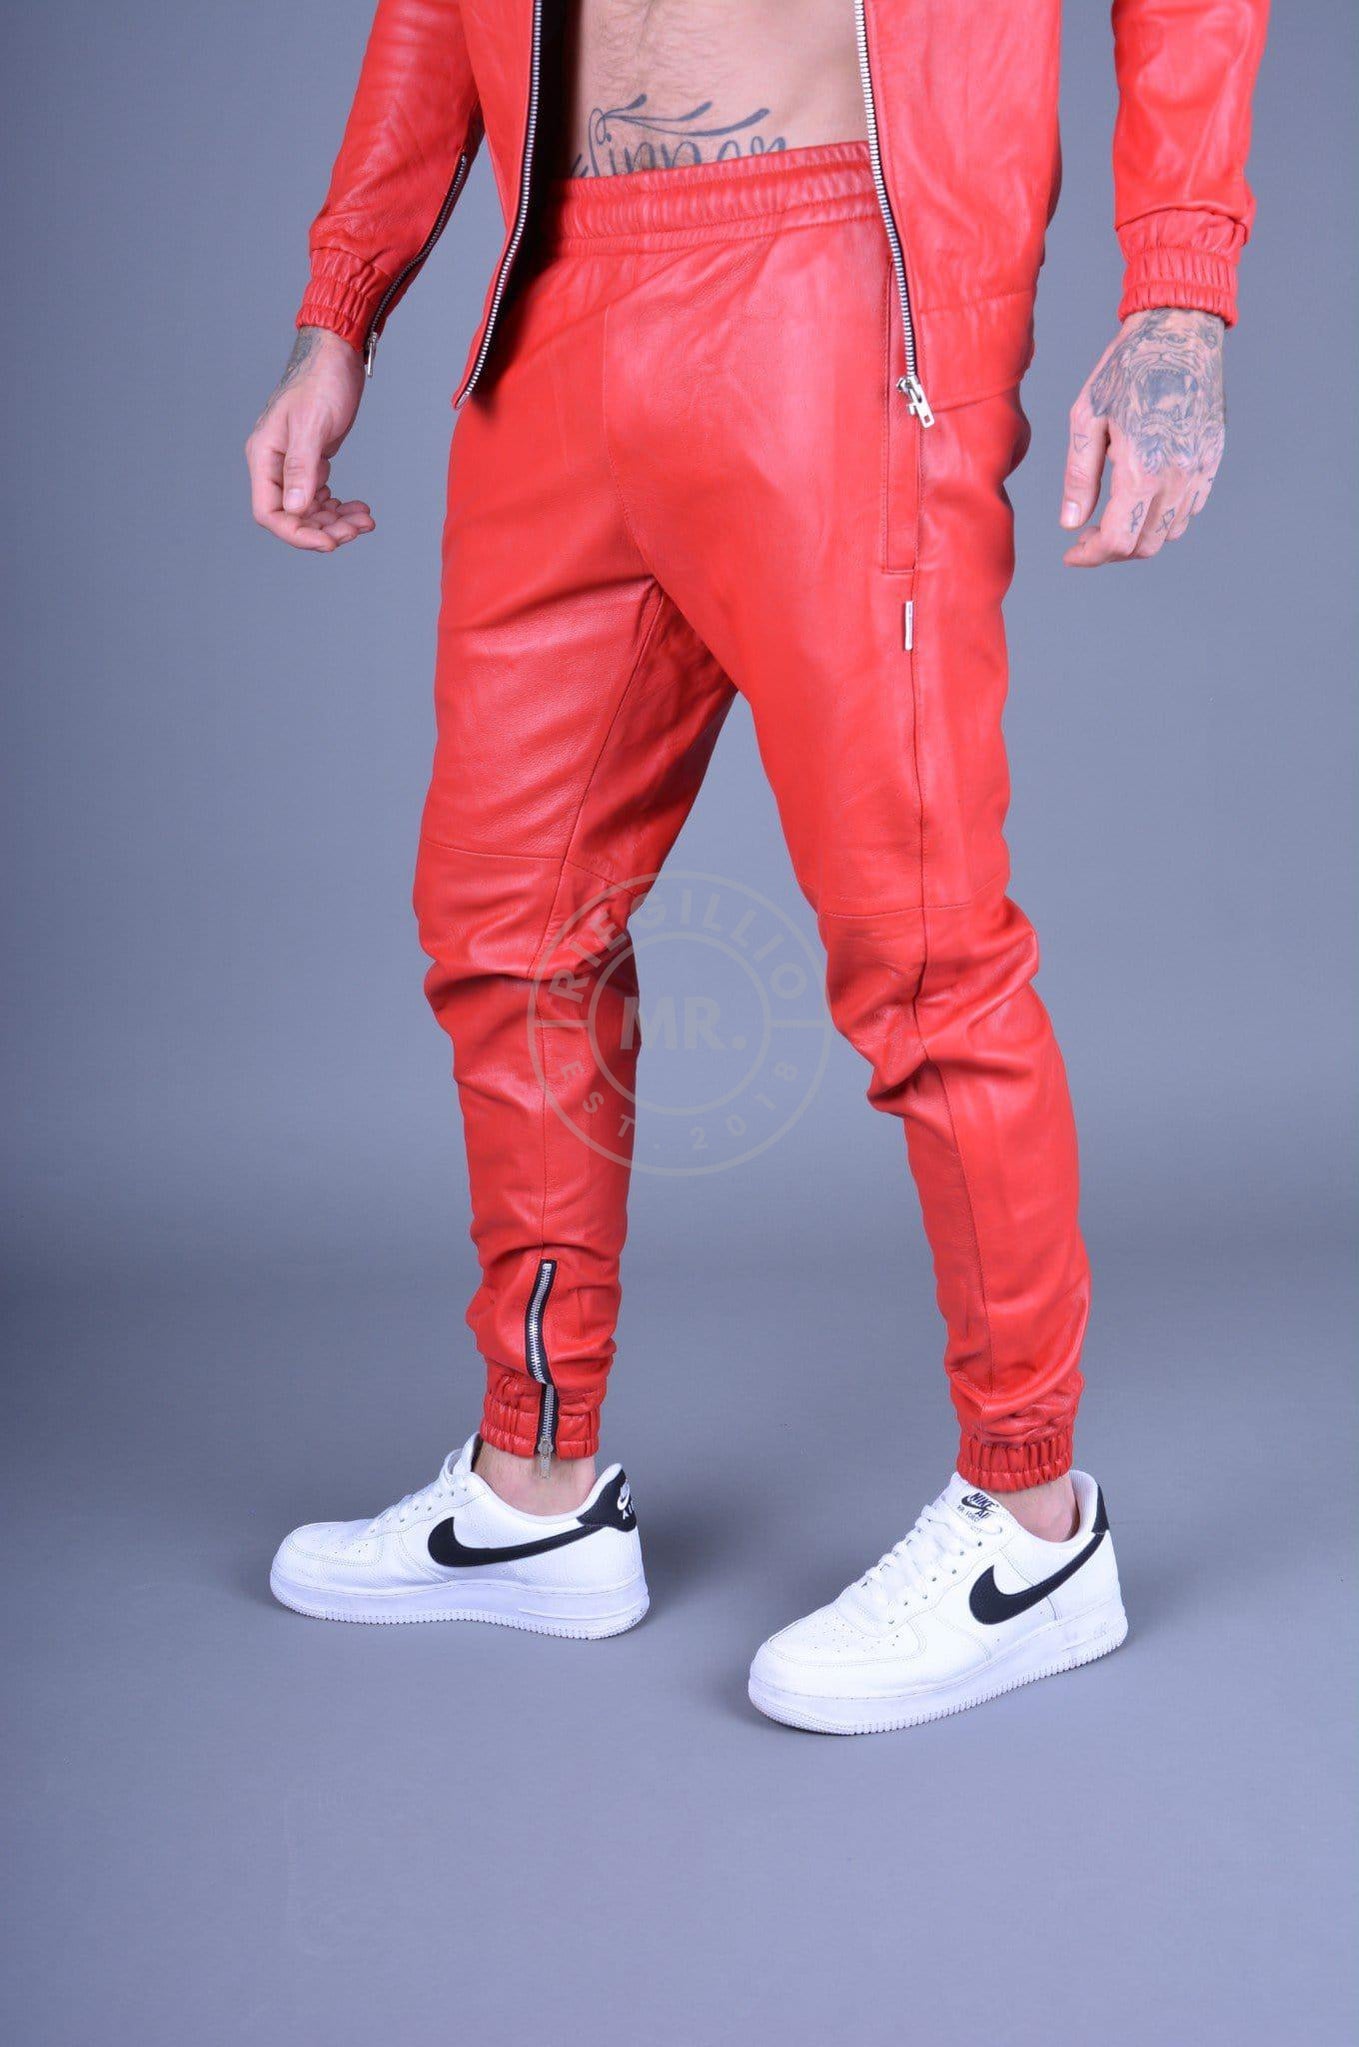 Red Leather Tracksuit Pants at MR. Riegillio